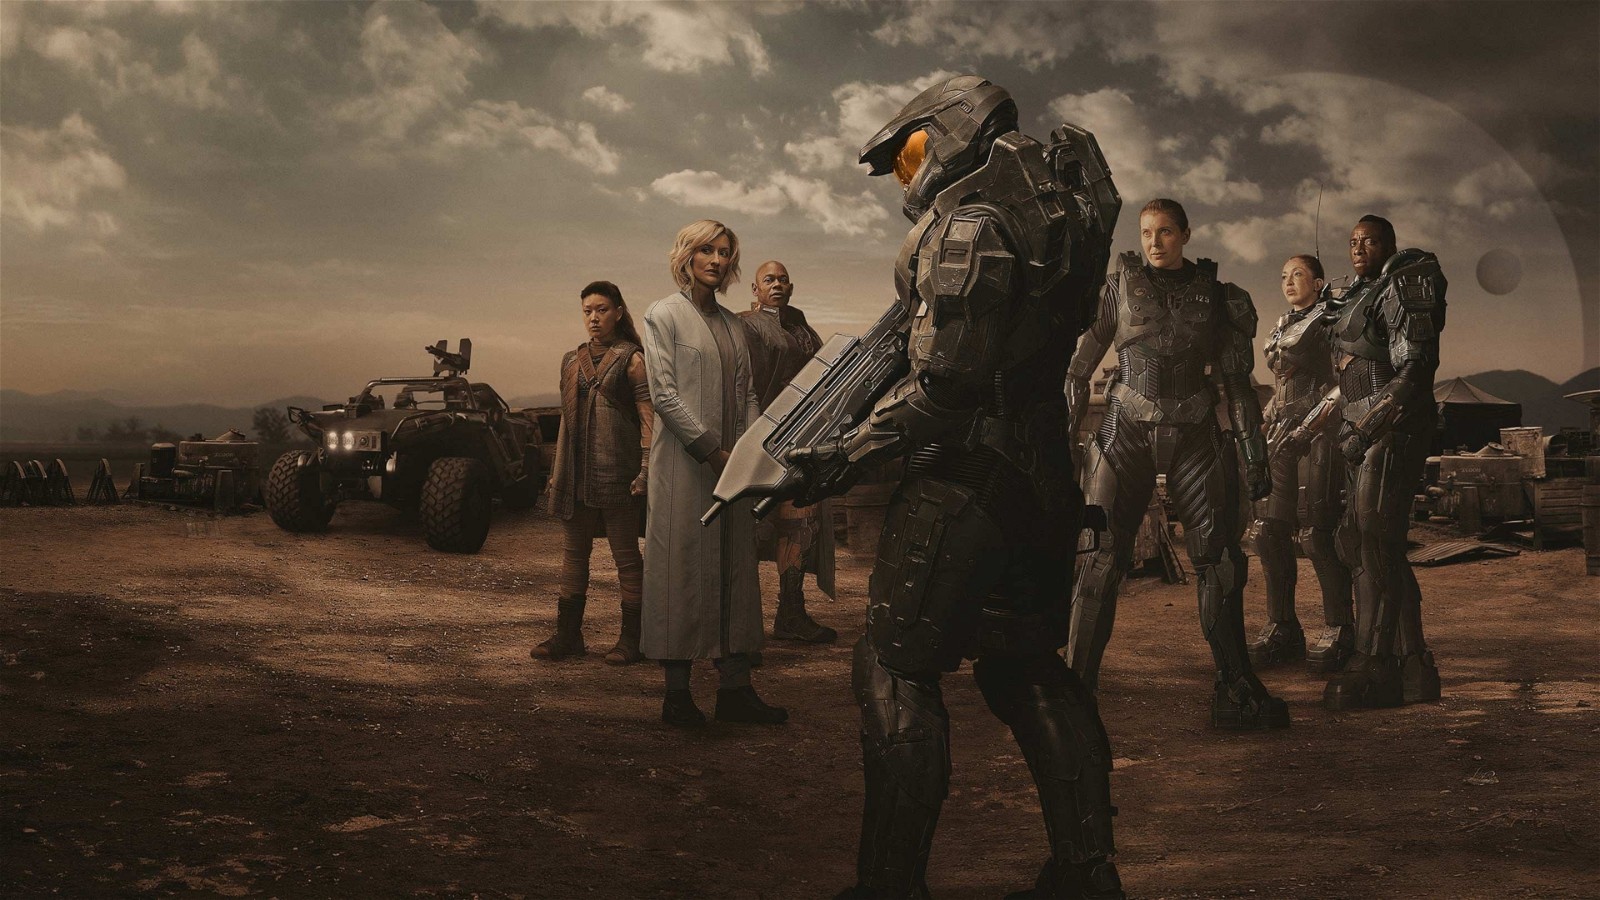 First look poster of Halo Season 2